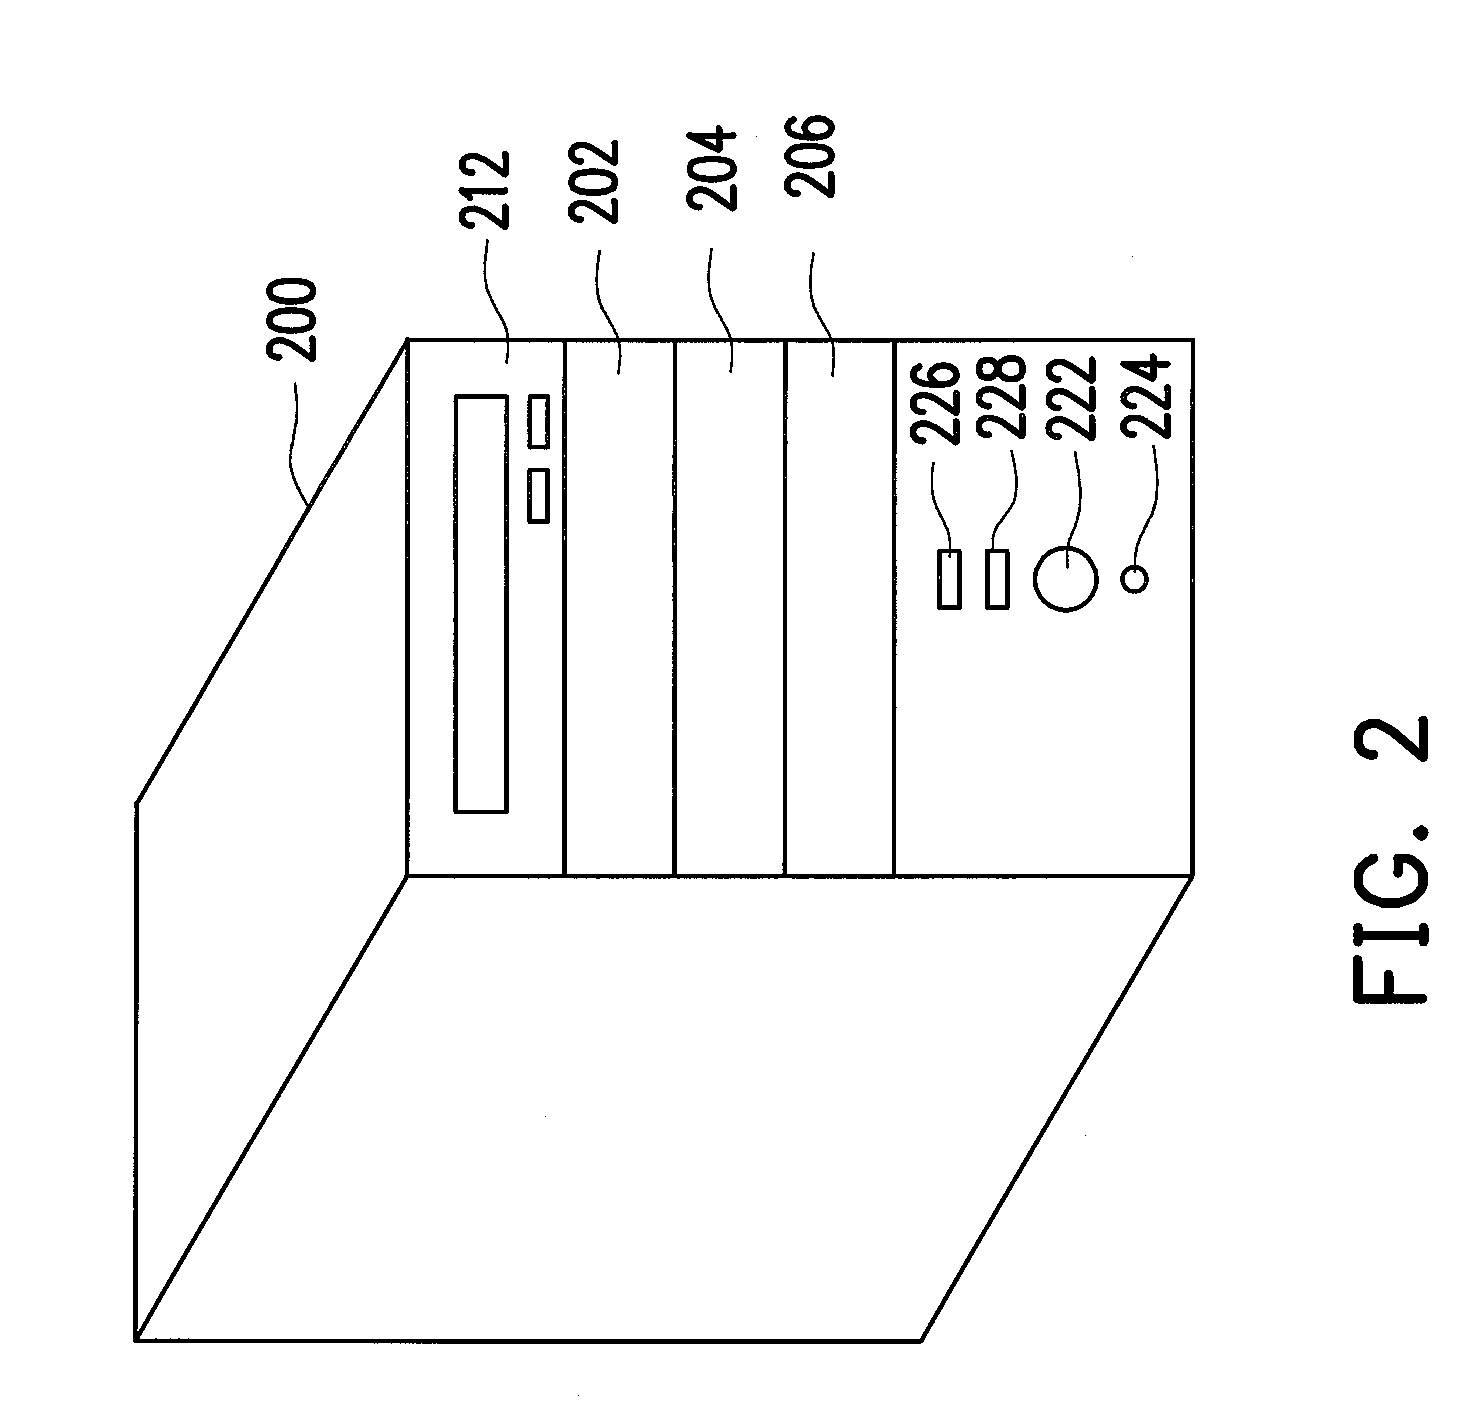 Computer system, method and system for controlling light